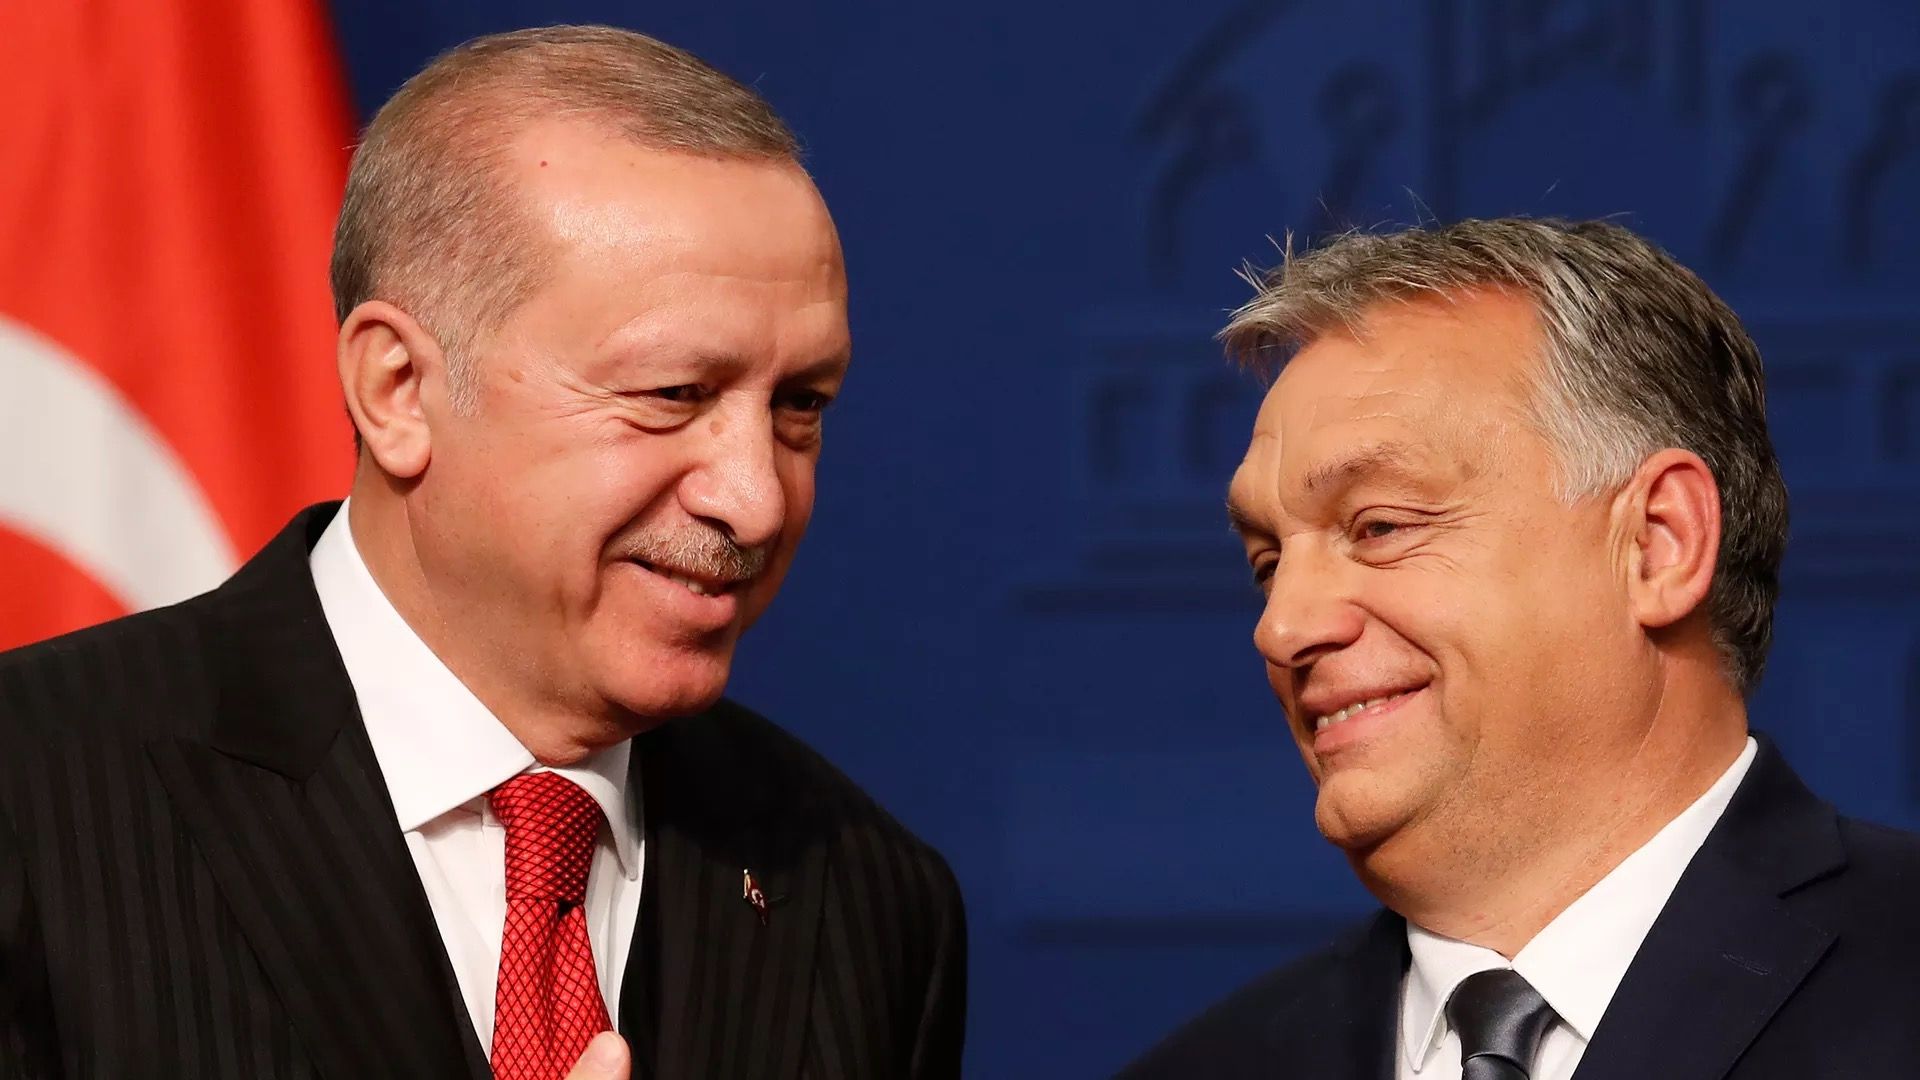 The president of Turkey and prime minister of Hungary are seen smiling together.